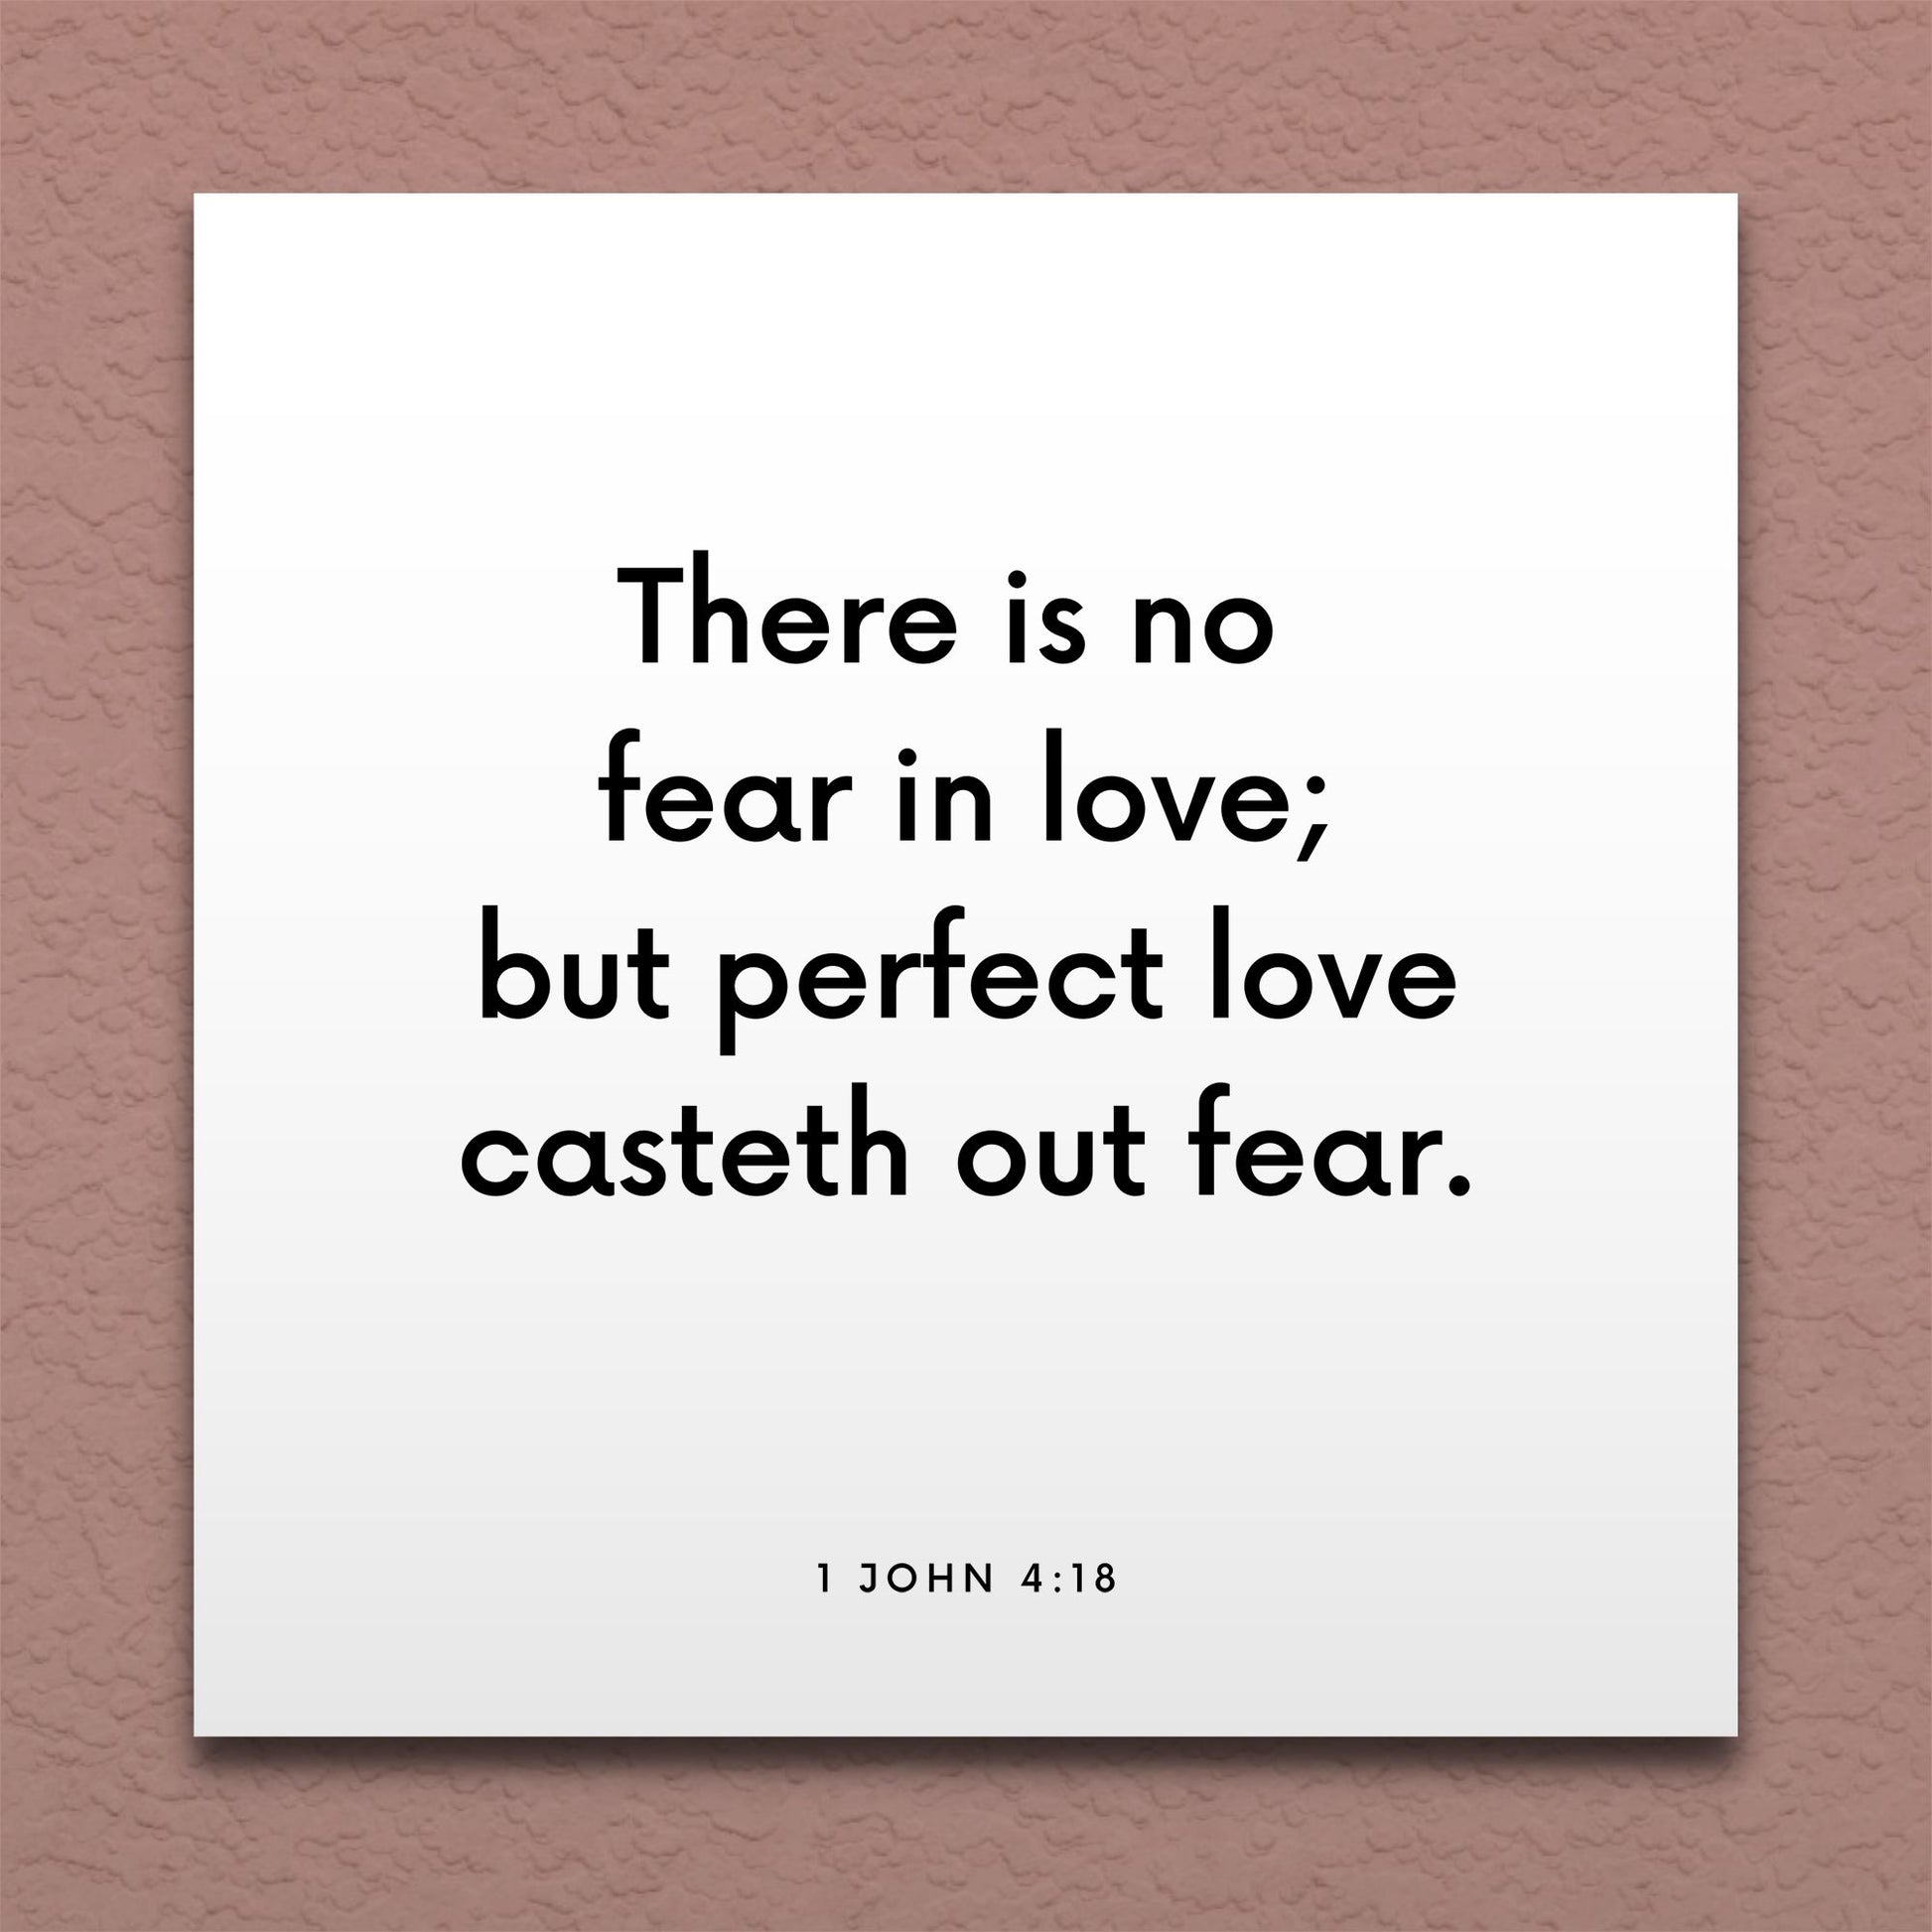 Wall-mounted scripture tile for 1 John 4:18 - "There is no fear in love; but perfect love casteth out fear"